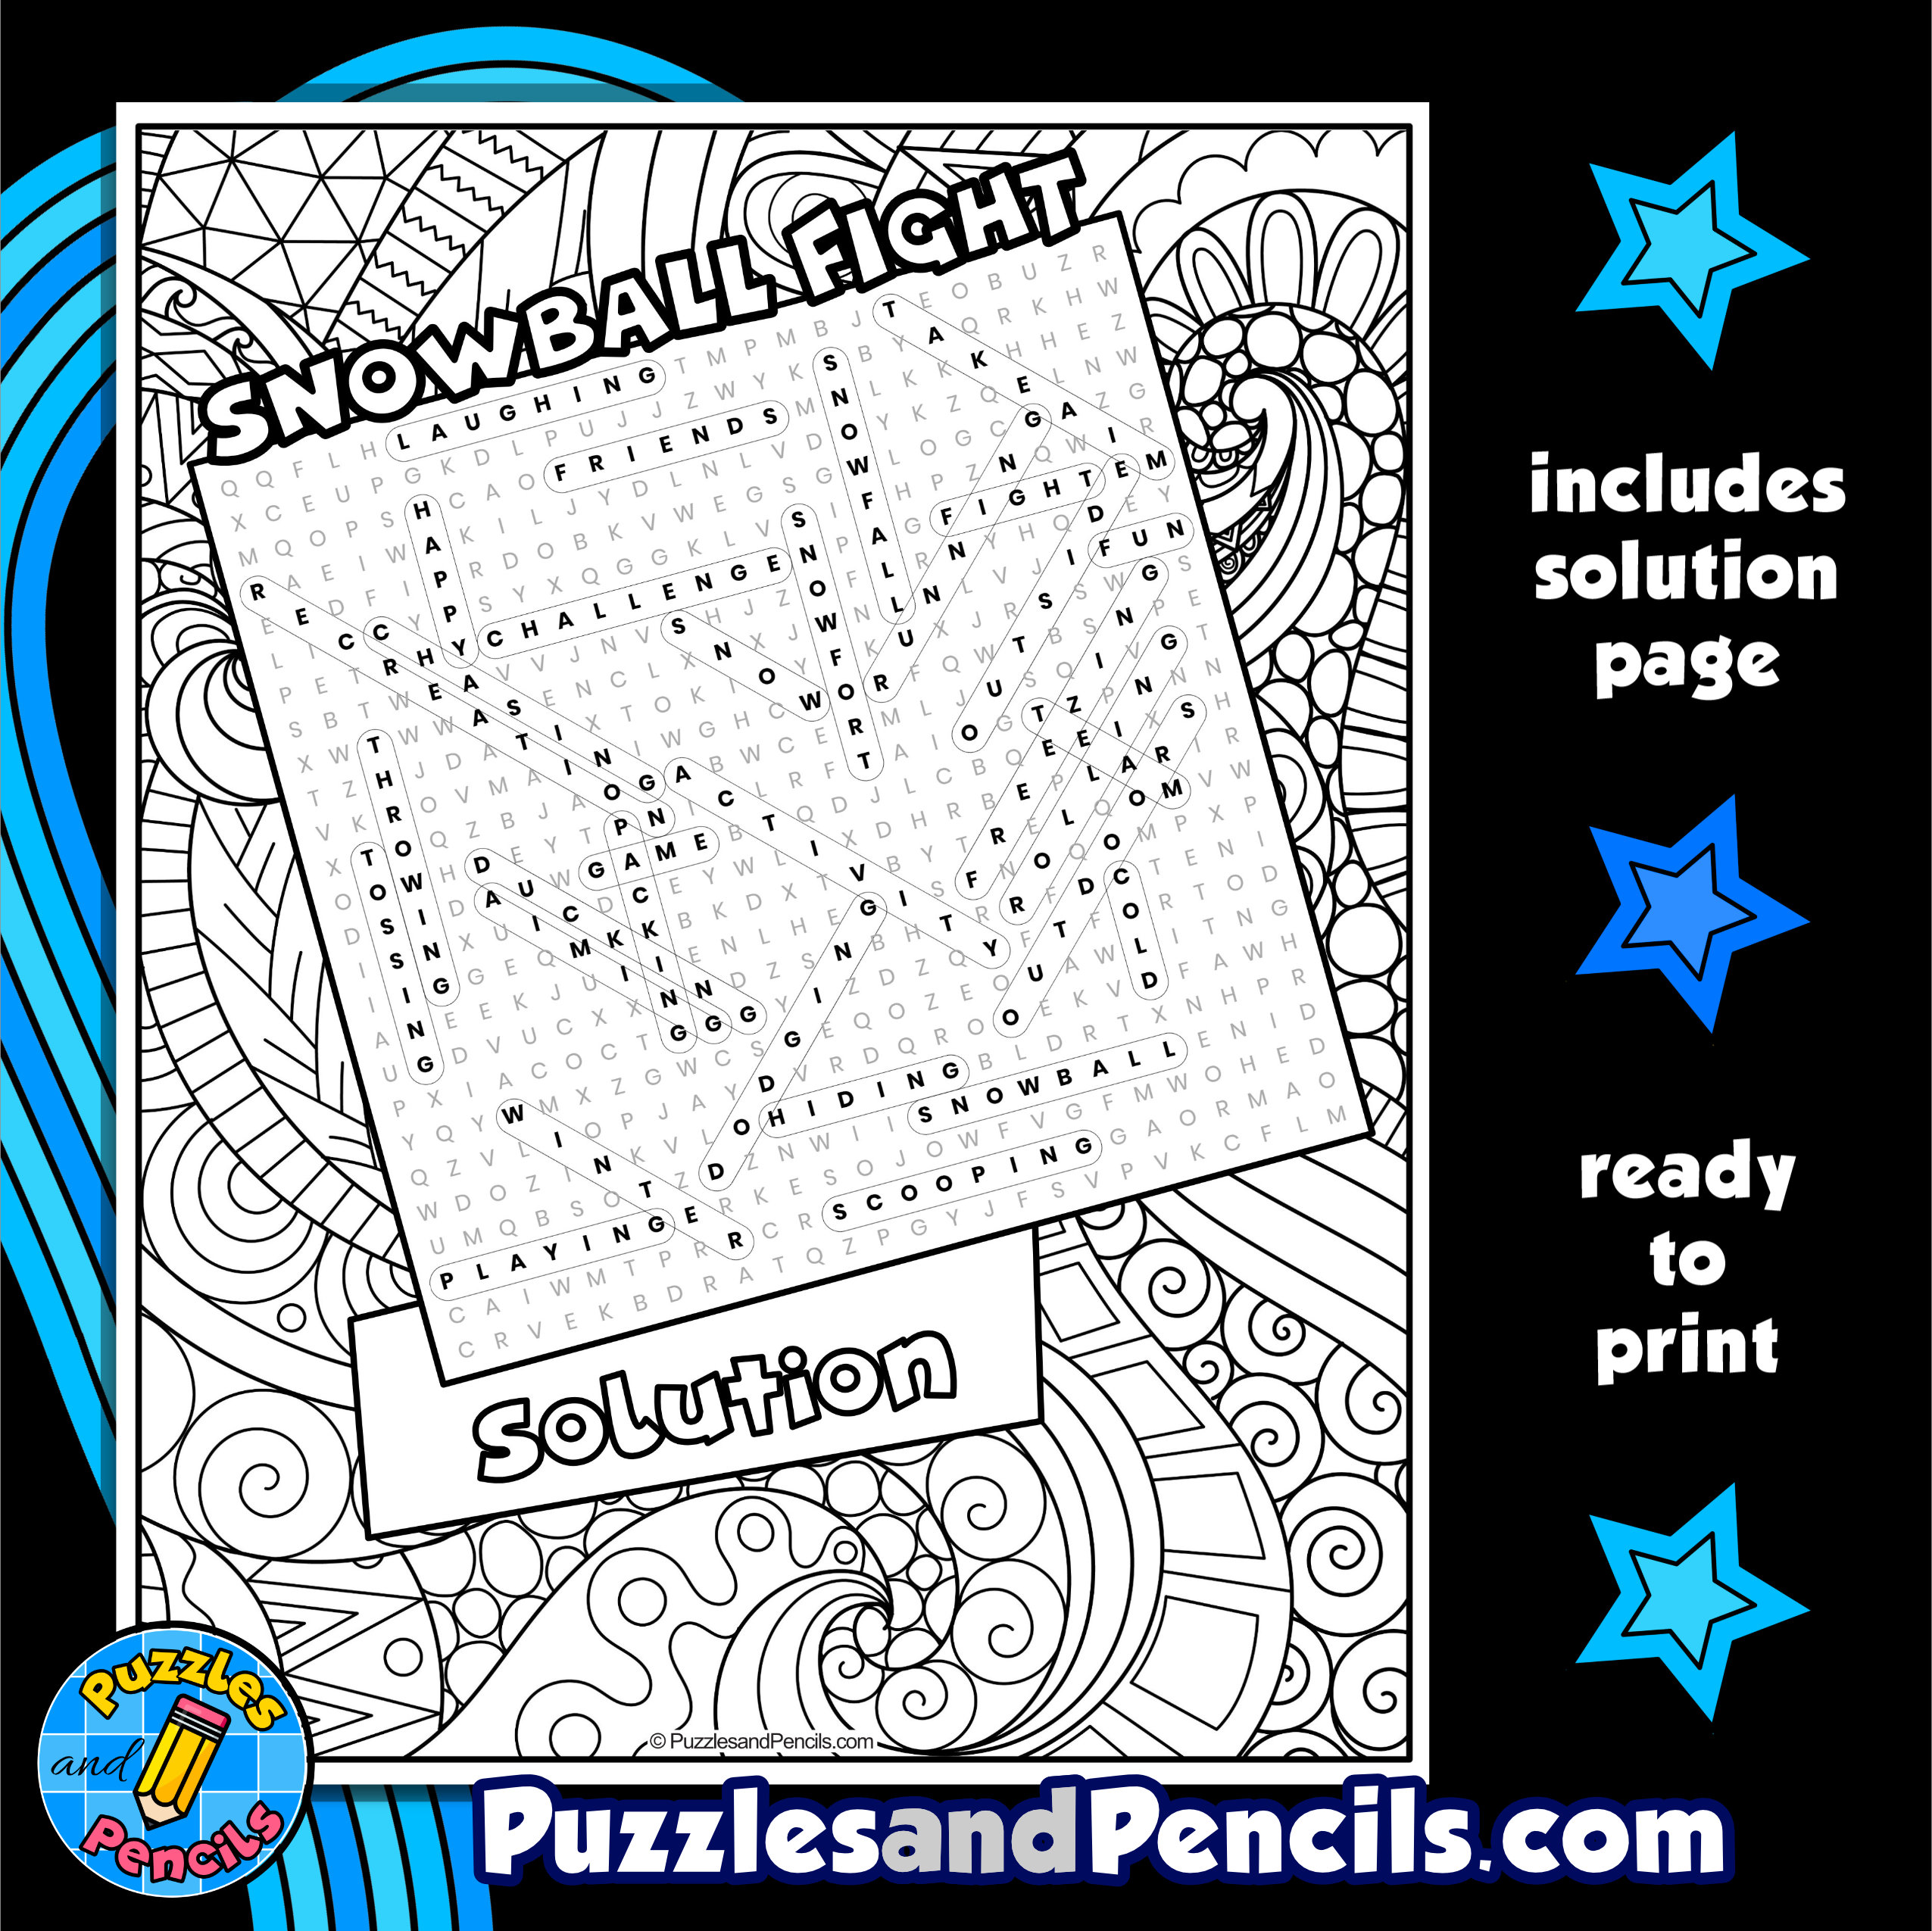 Snowball fight word search puzzle activity page with coloring seasons winter made by teachers